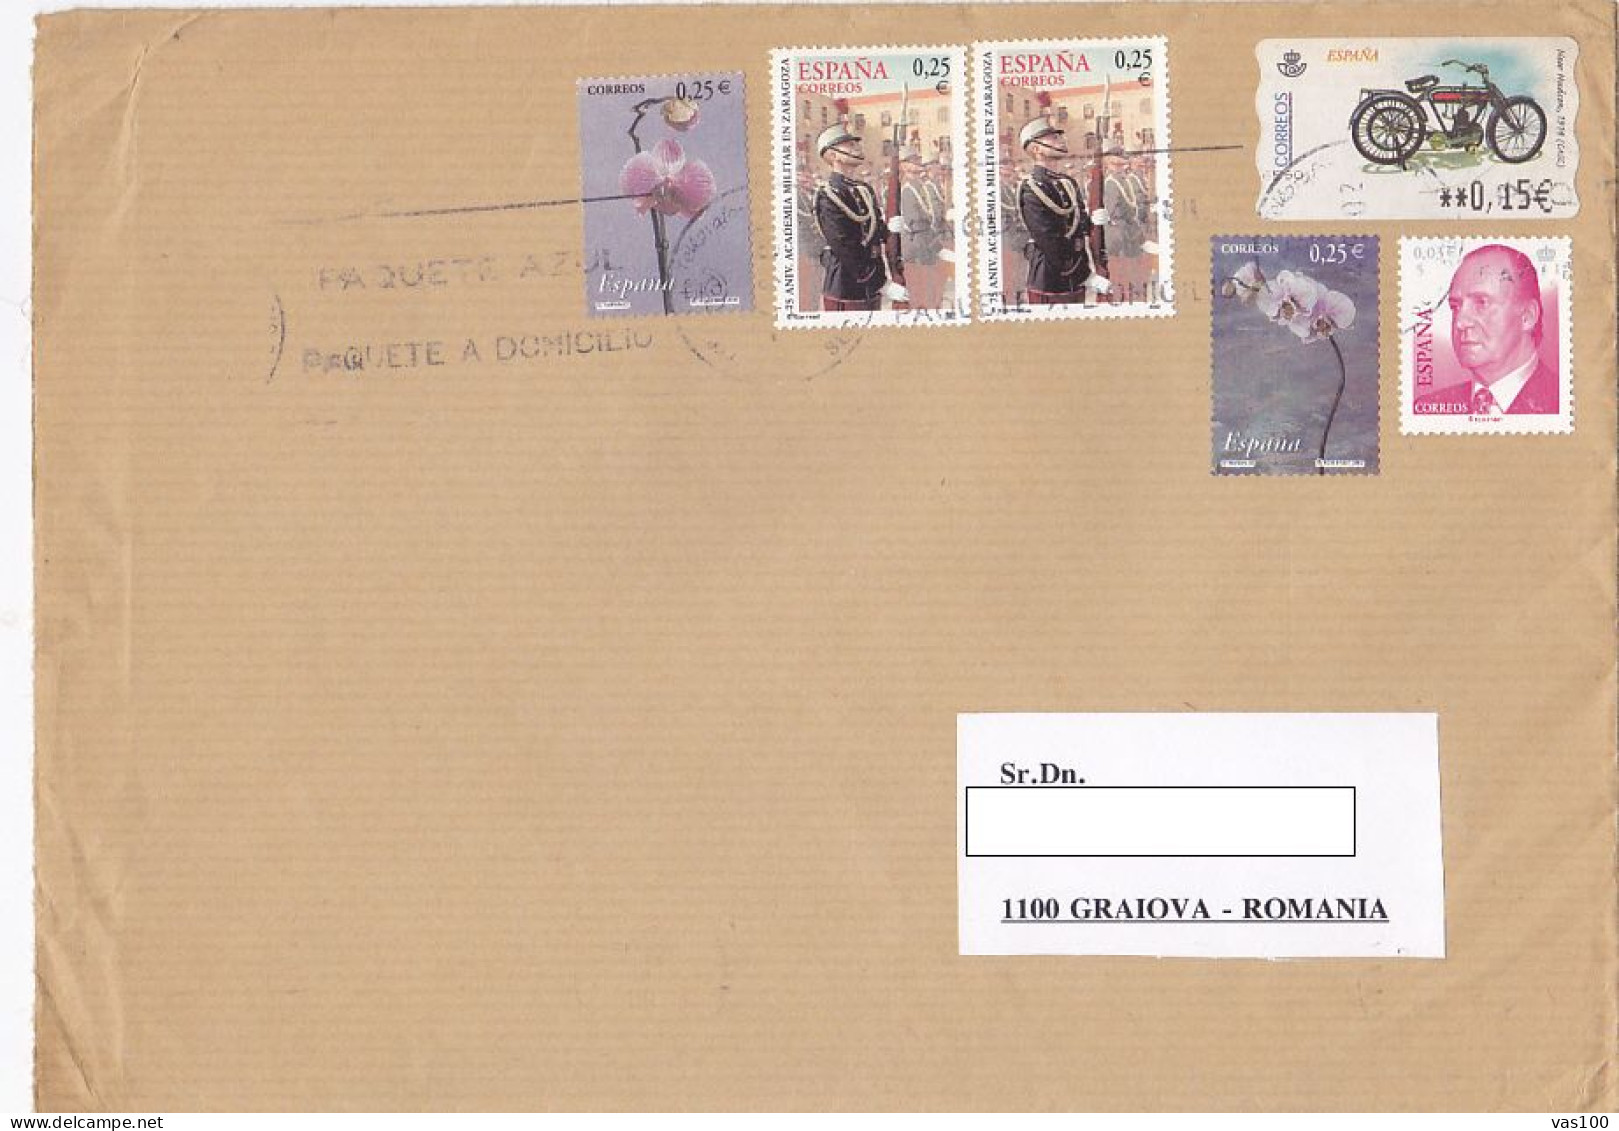 ORCHIDS, ZARAGOZA MILITARY ACADEMY, KING JUAN CARLOS, MOTORBIKE, STAMPS ON COVER, 2002, SPAIN - Covers & Documents